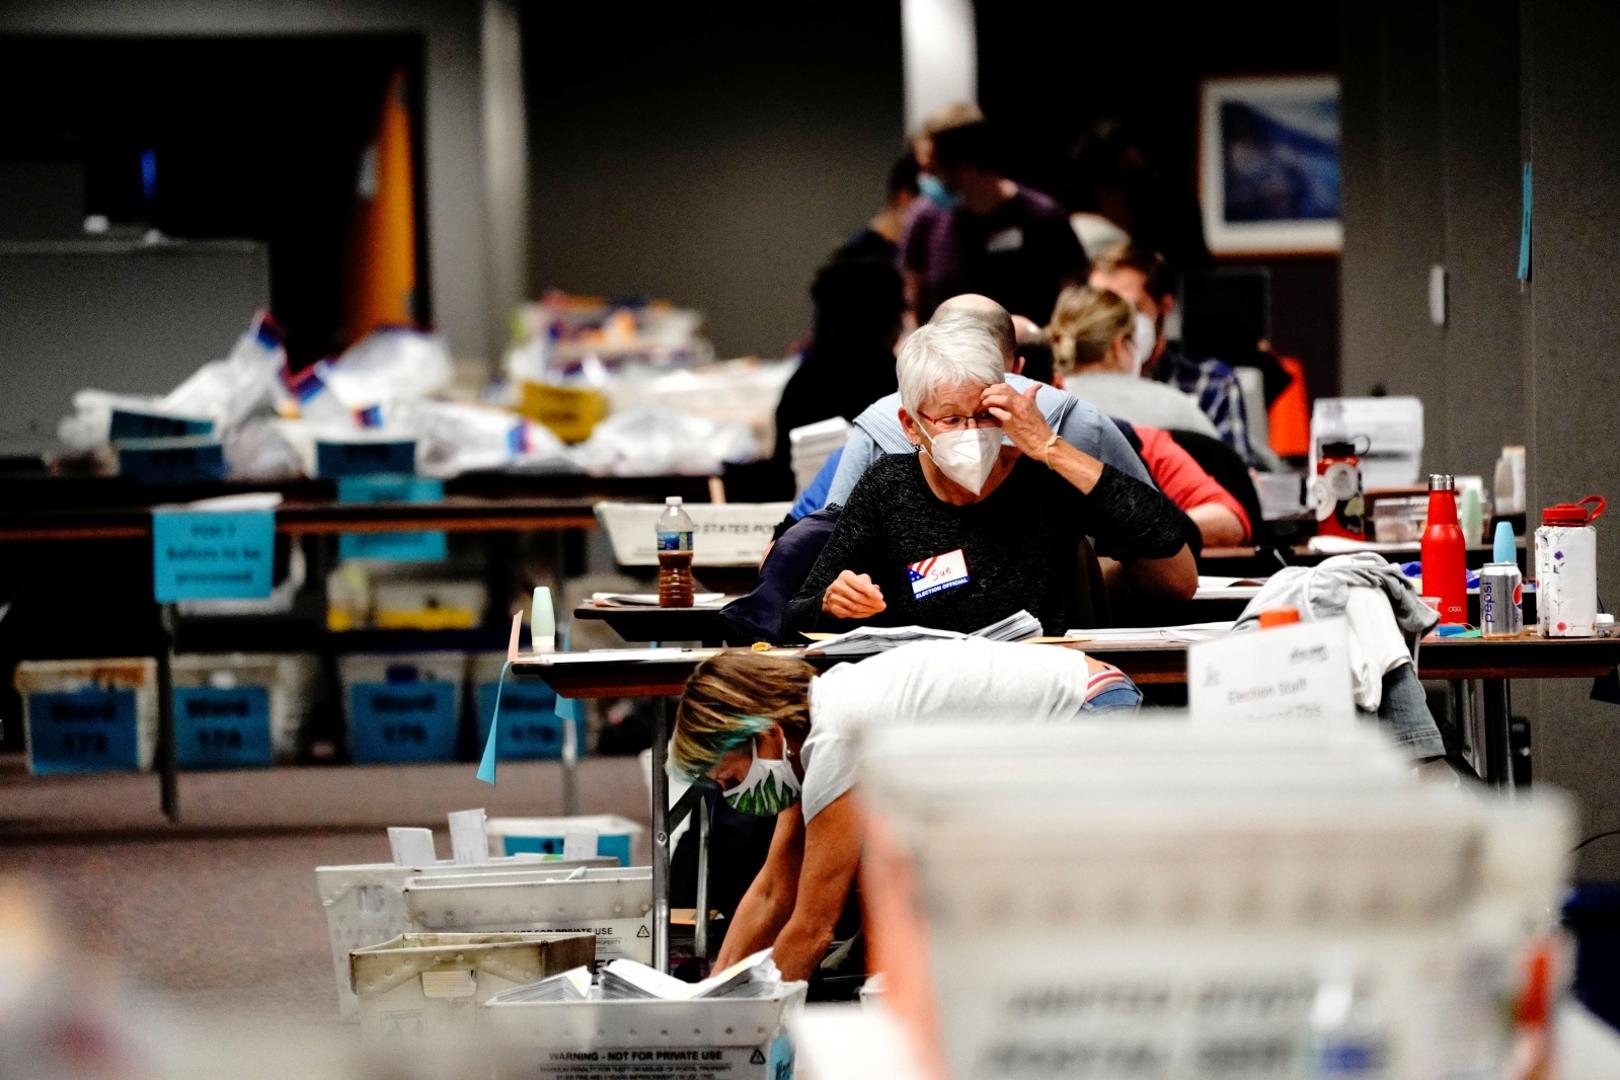 Counting absentee ballots at Milwaukee Central Count A poll worker gestures while processing absentee ballots Milwaukee Central Count the night of Election Day in Milwaukee, Wisconsin, U.S., November 3, 2020. REUTERS/Bing Guan BING GUAN